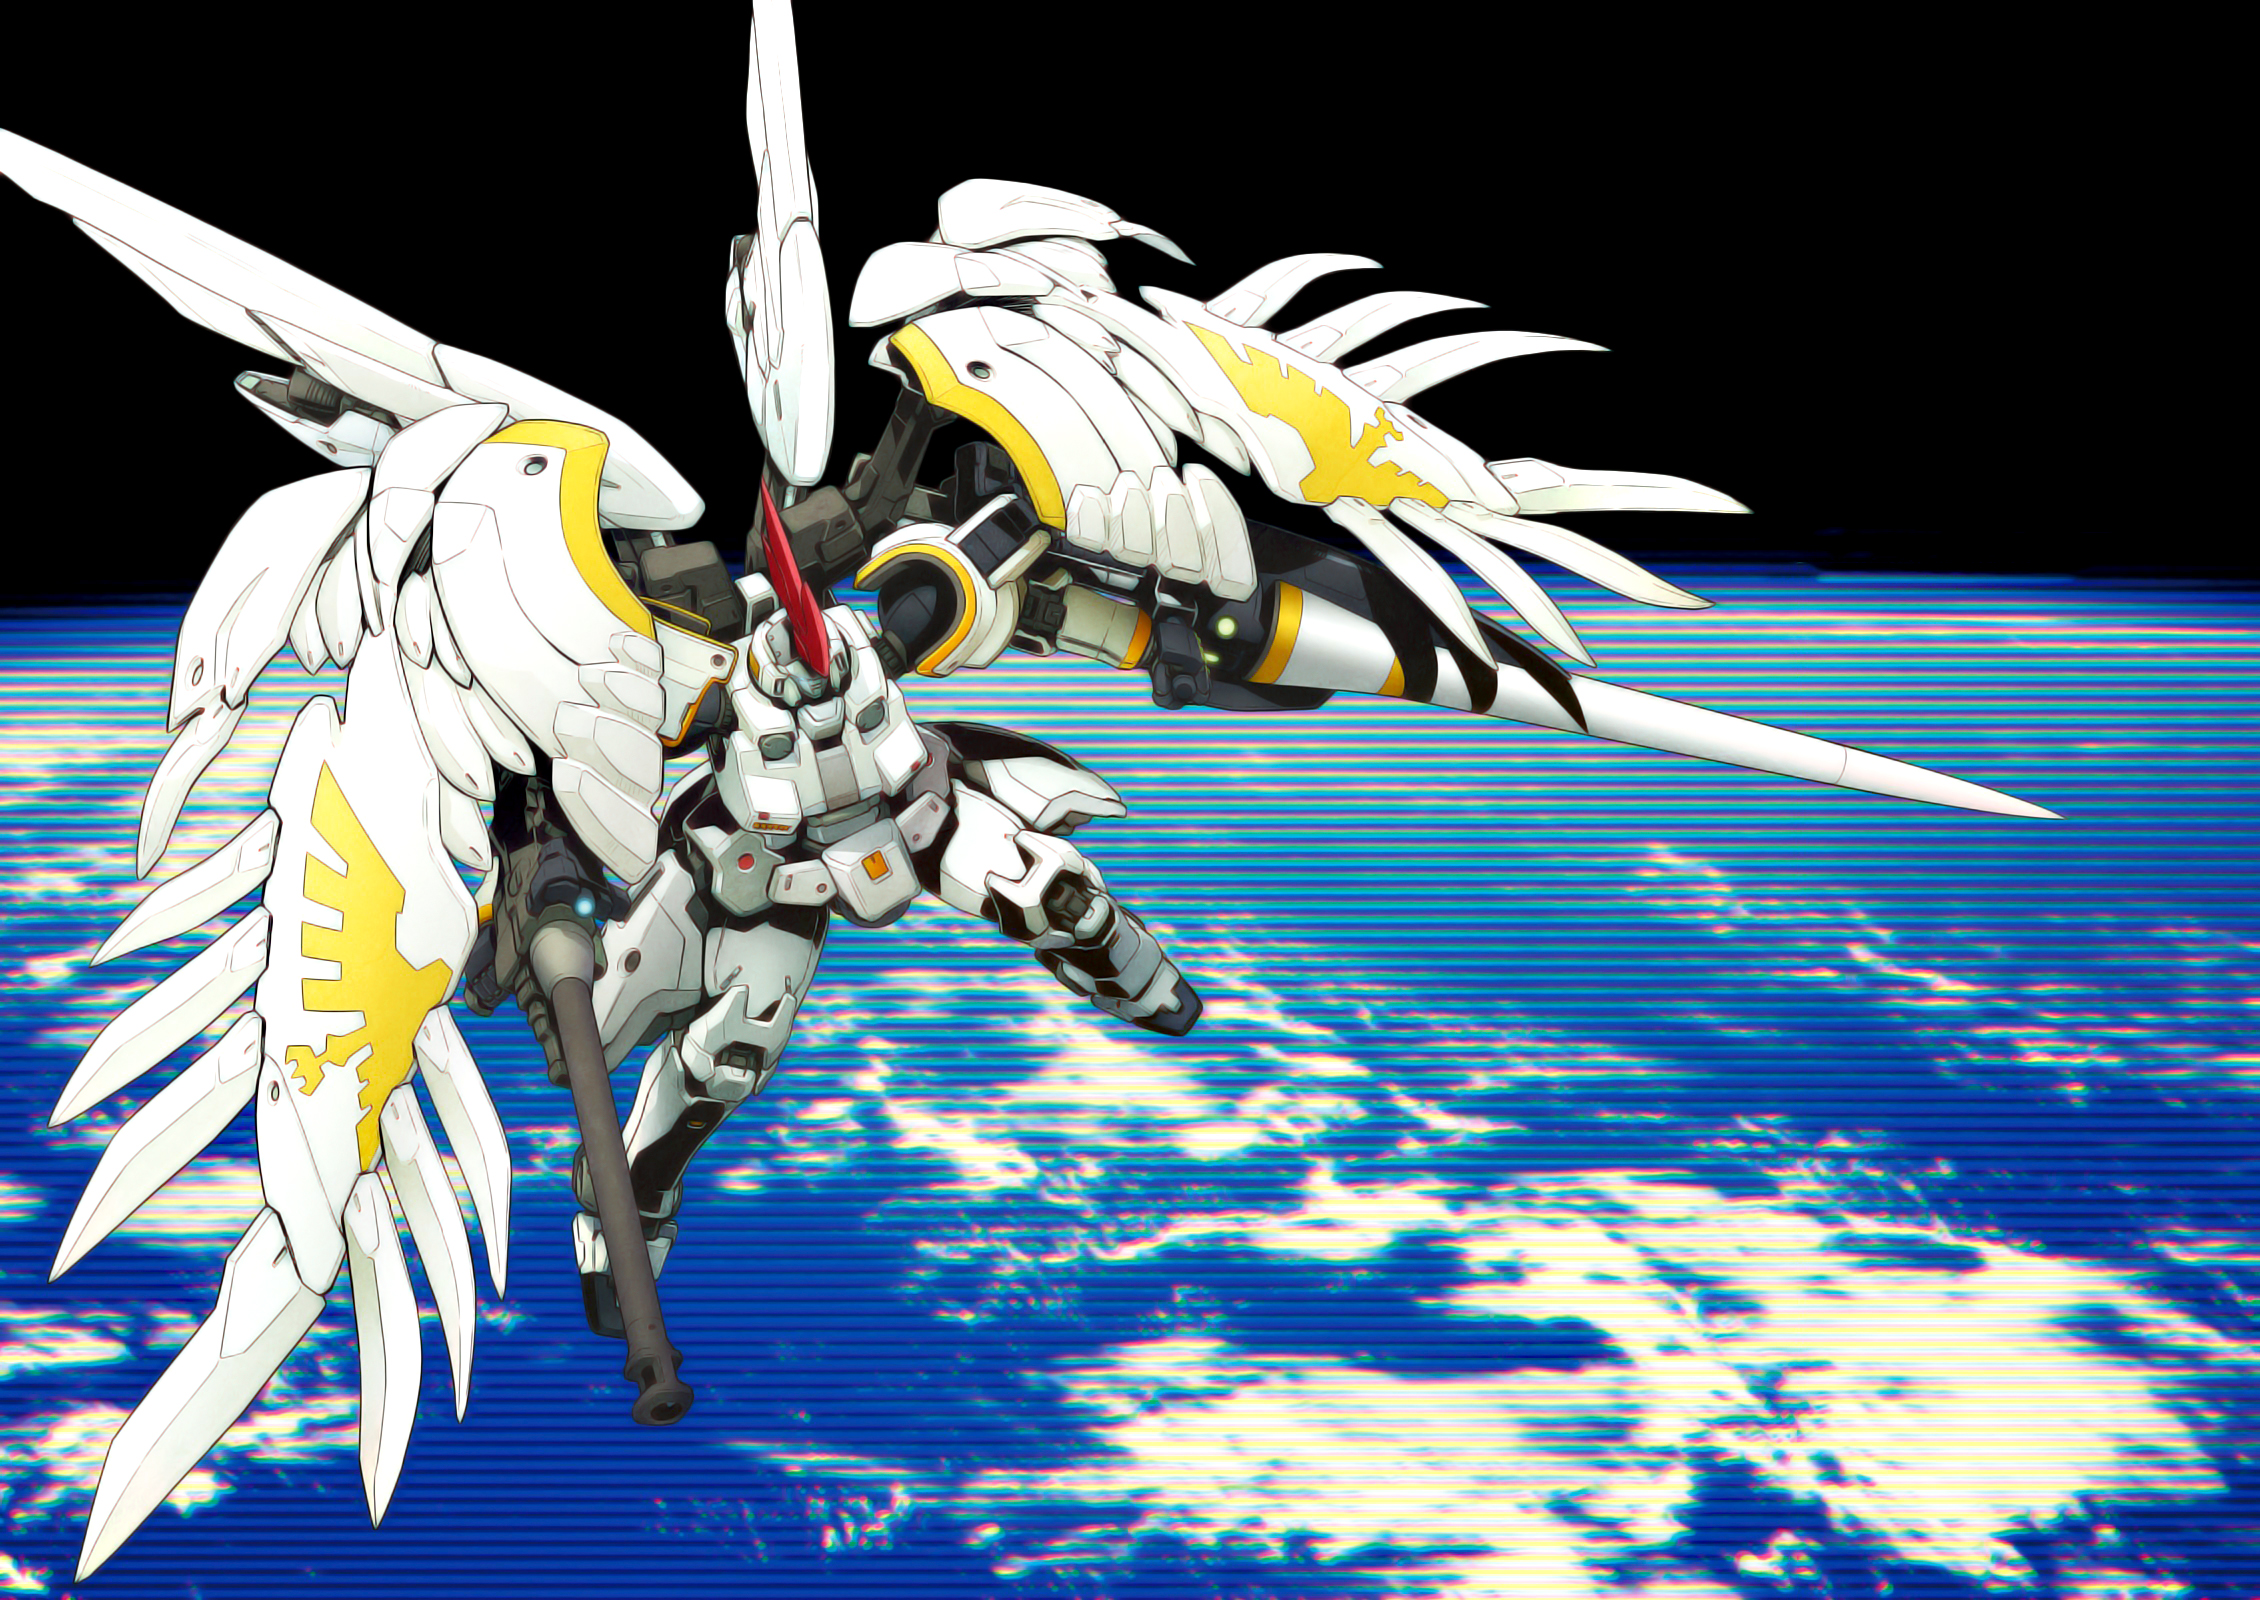 Anime Mobile Suit Gundam Wing HD Wallpaper | Background Image